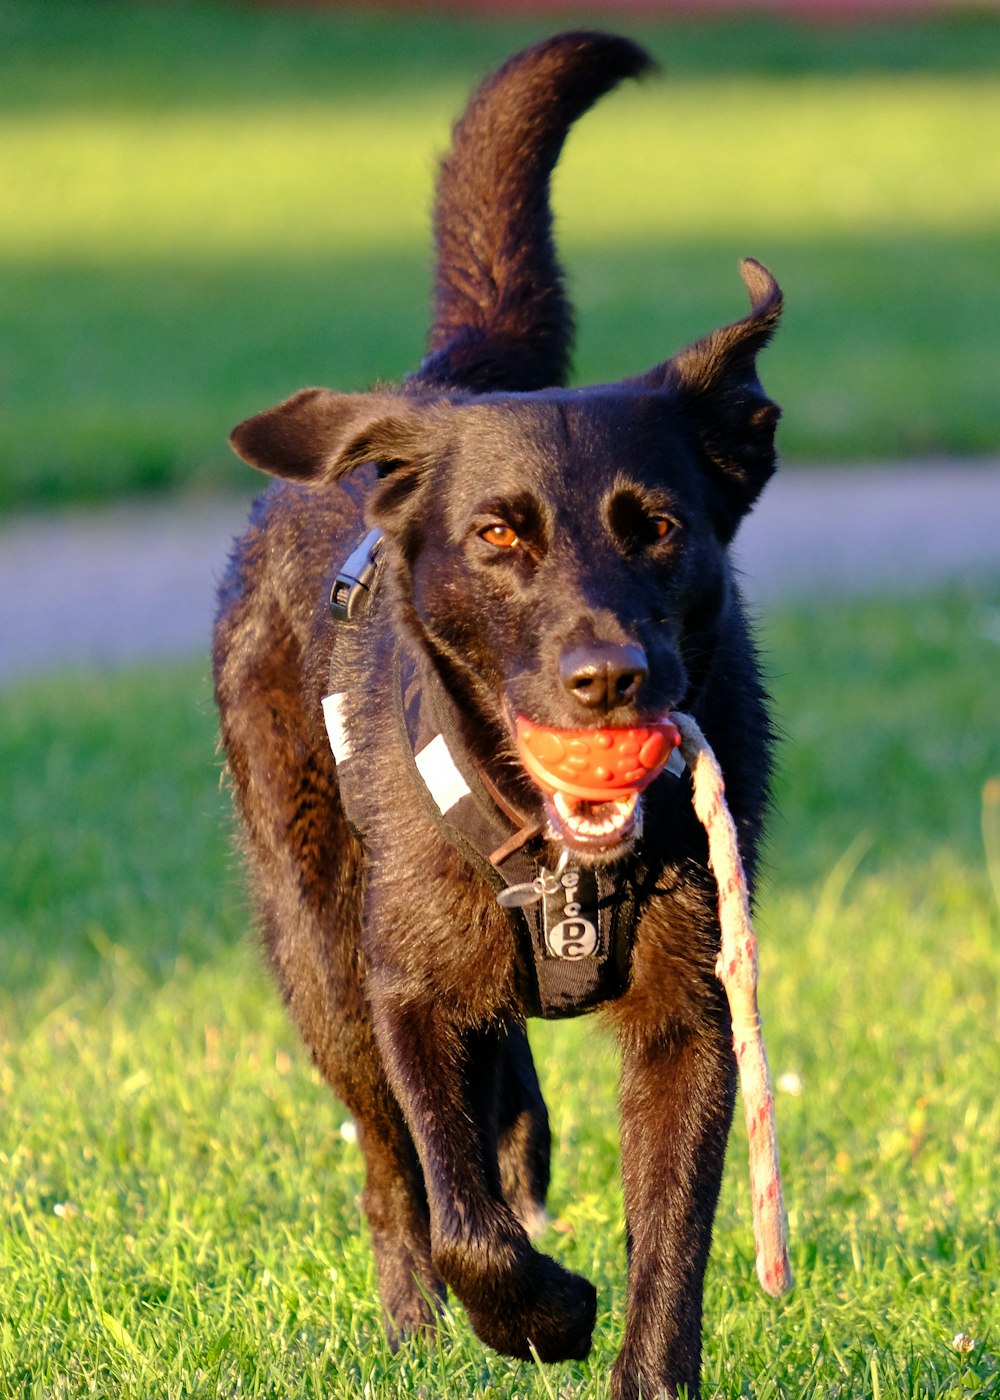 black short coat large dog with blue collar on green grass field during daytime